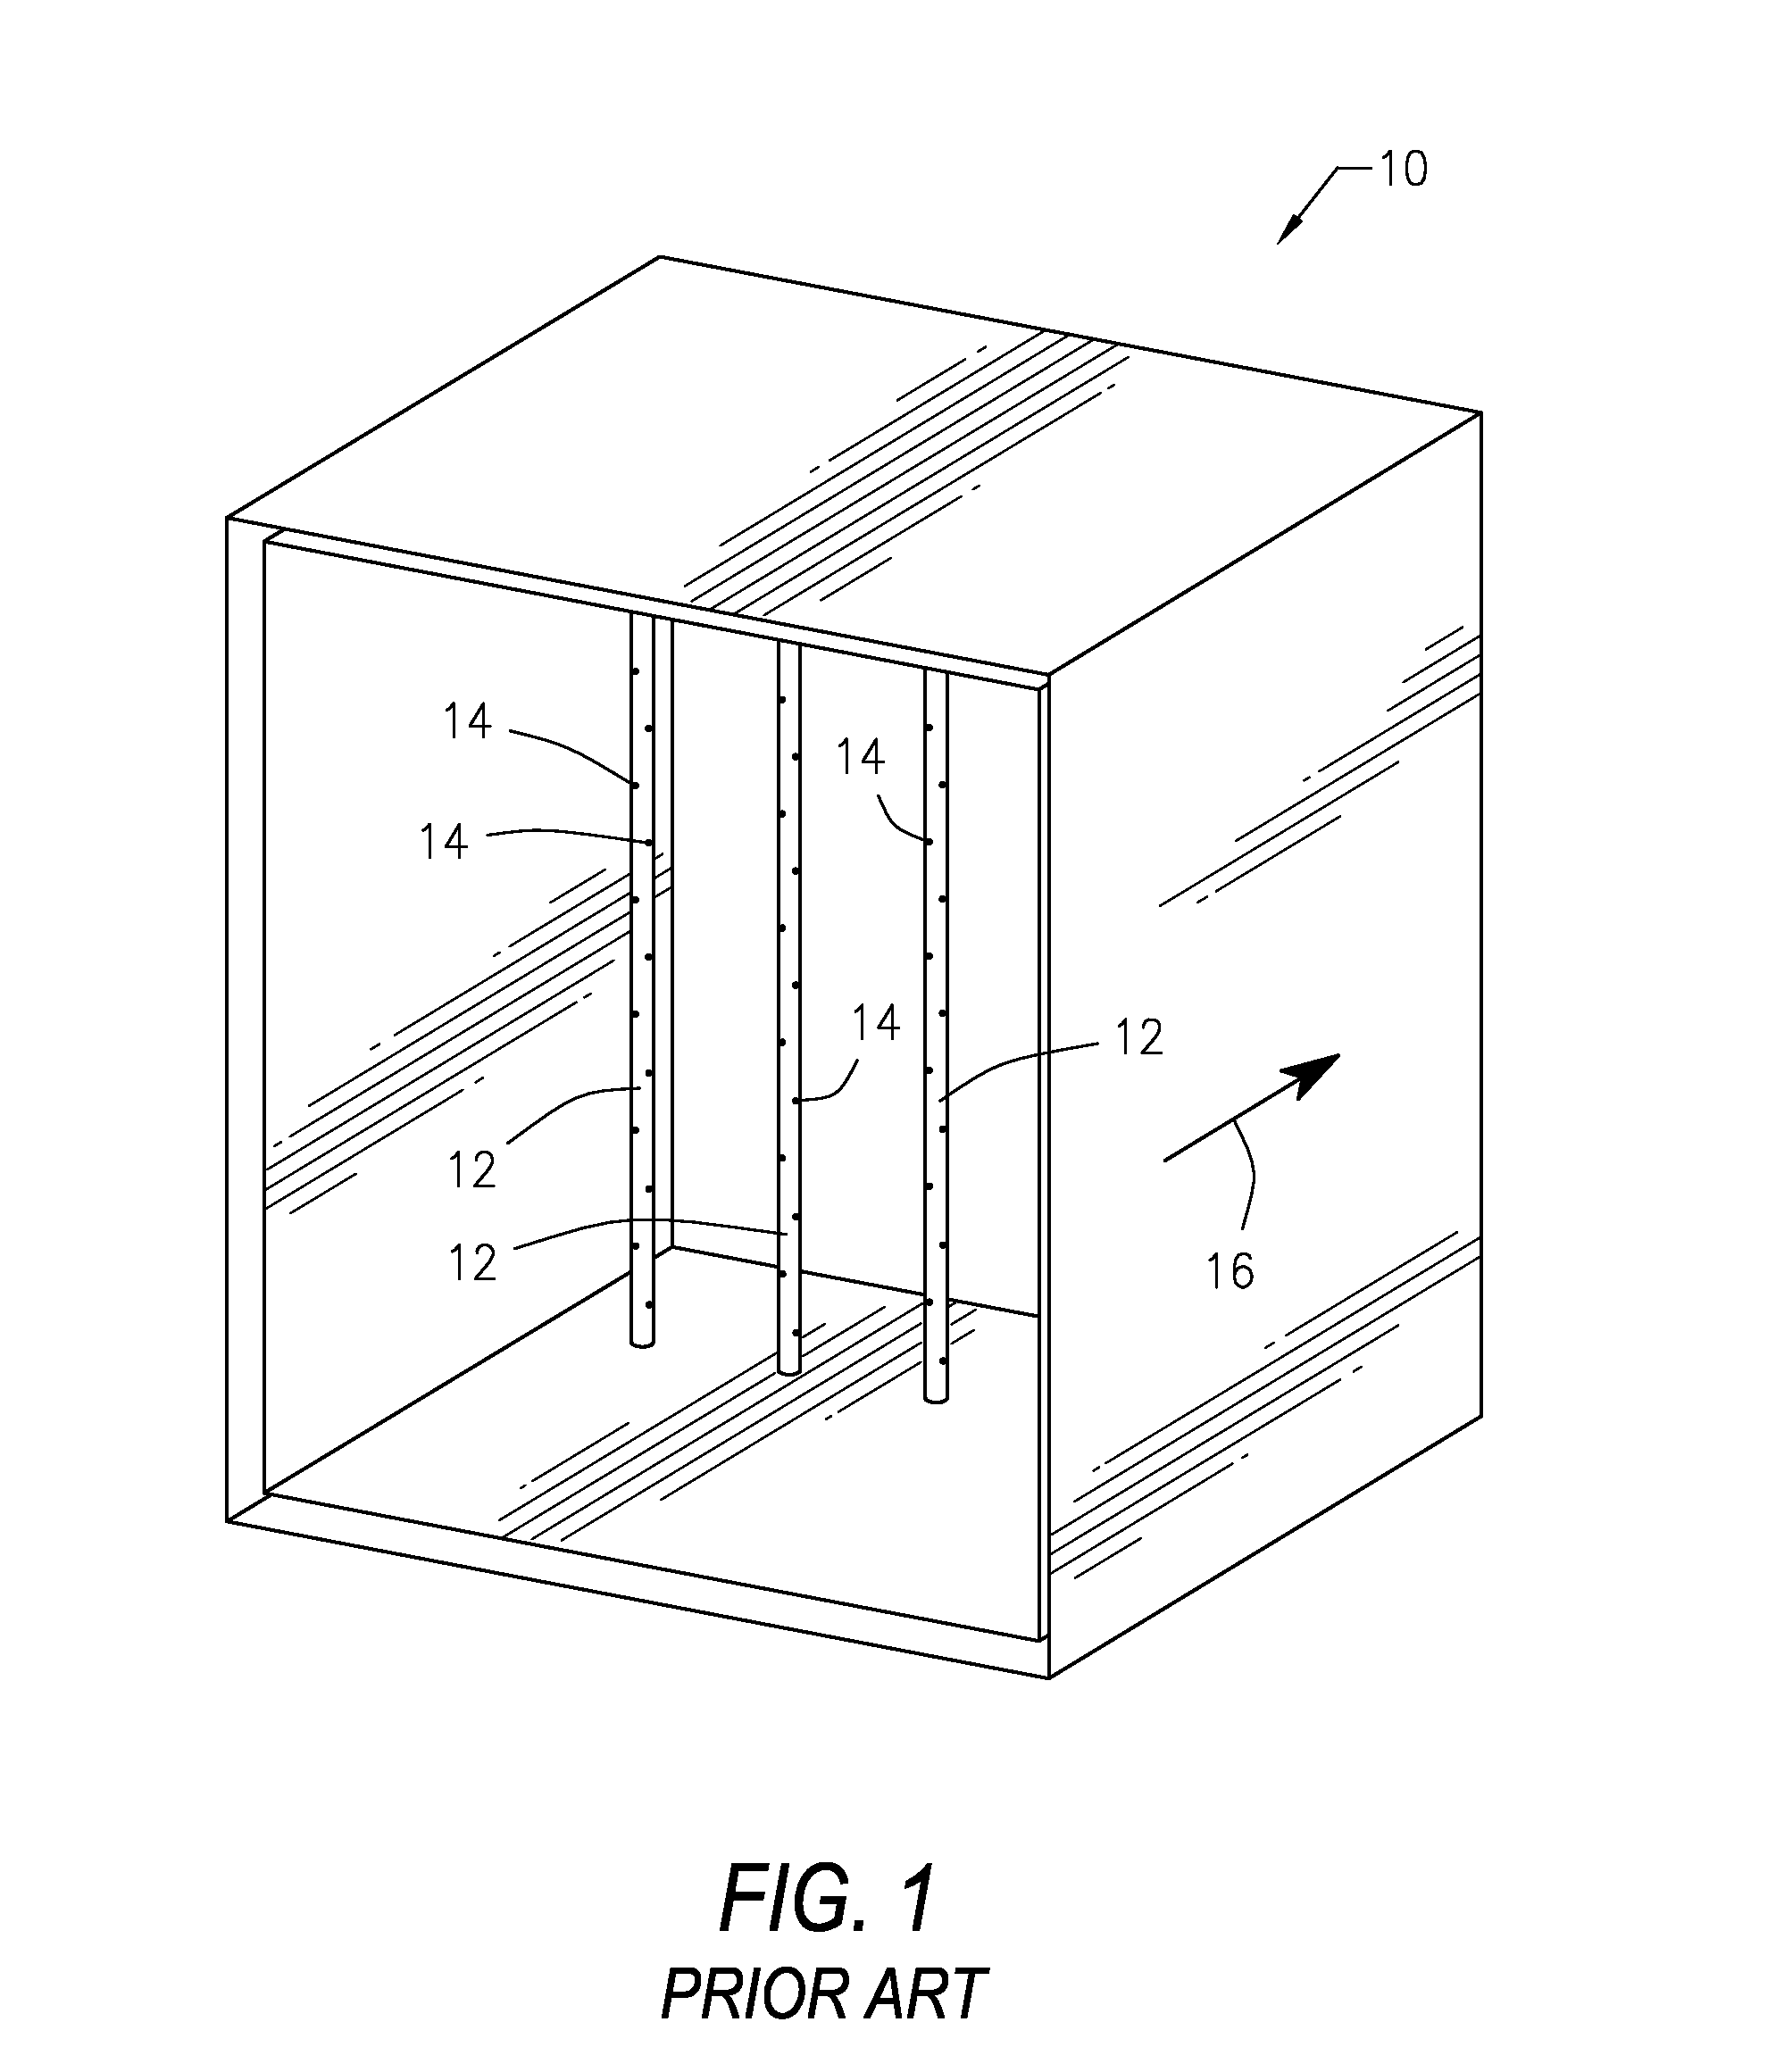 Ammonia injection grid for a selective catalytic reduction system